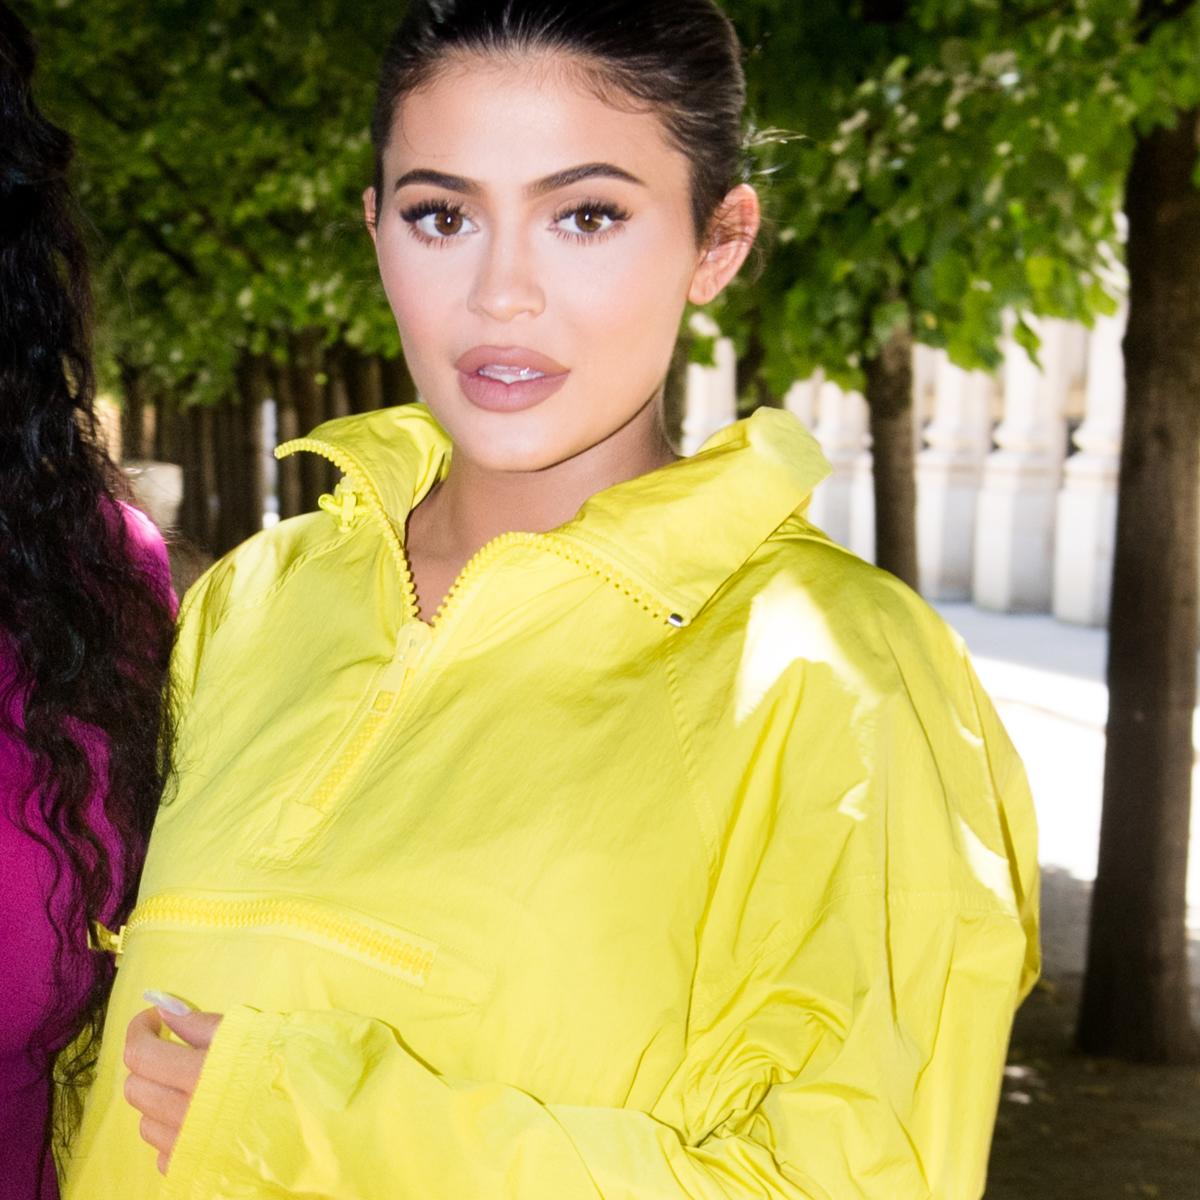 Kylie Jenner Wears a Fendi Two-Piece Towel Outfit